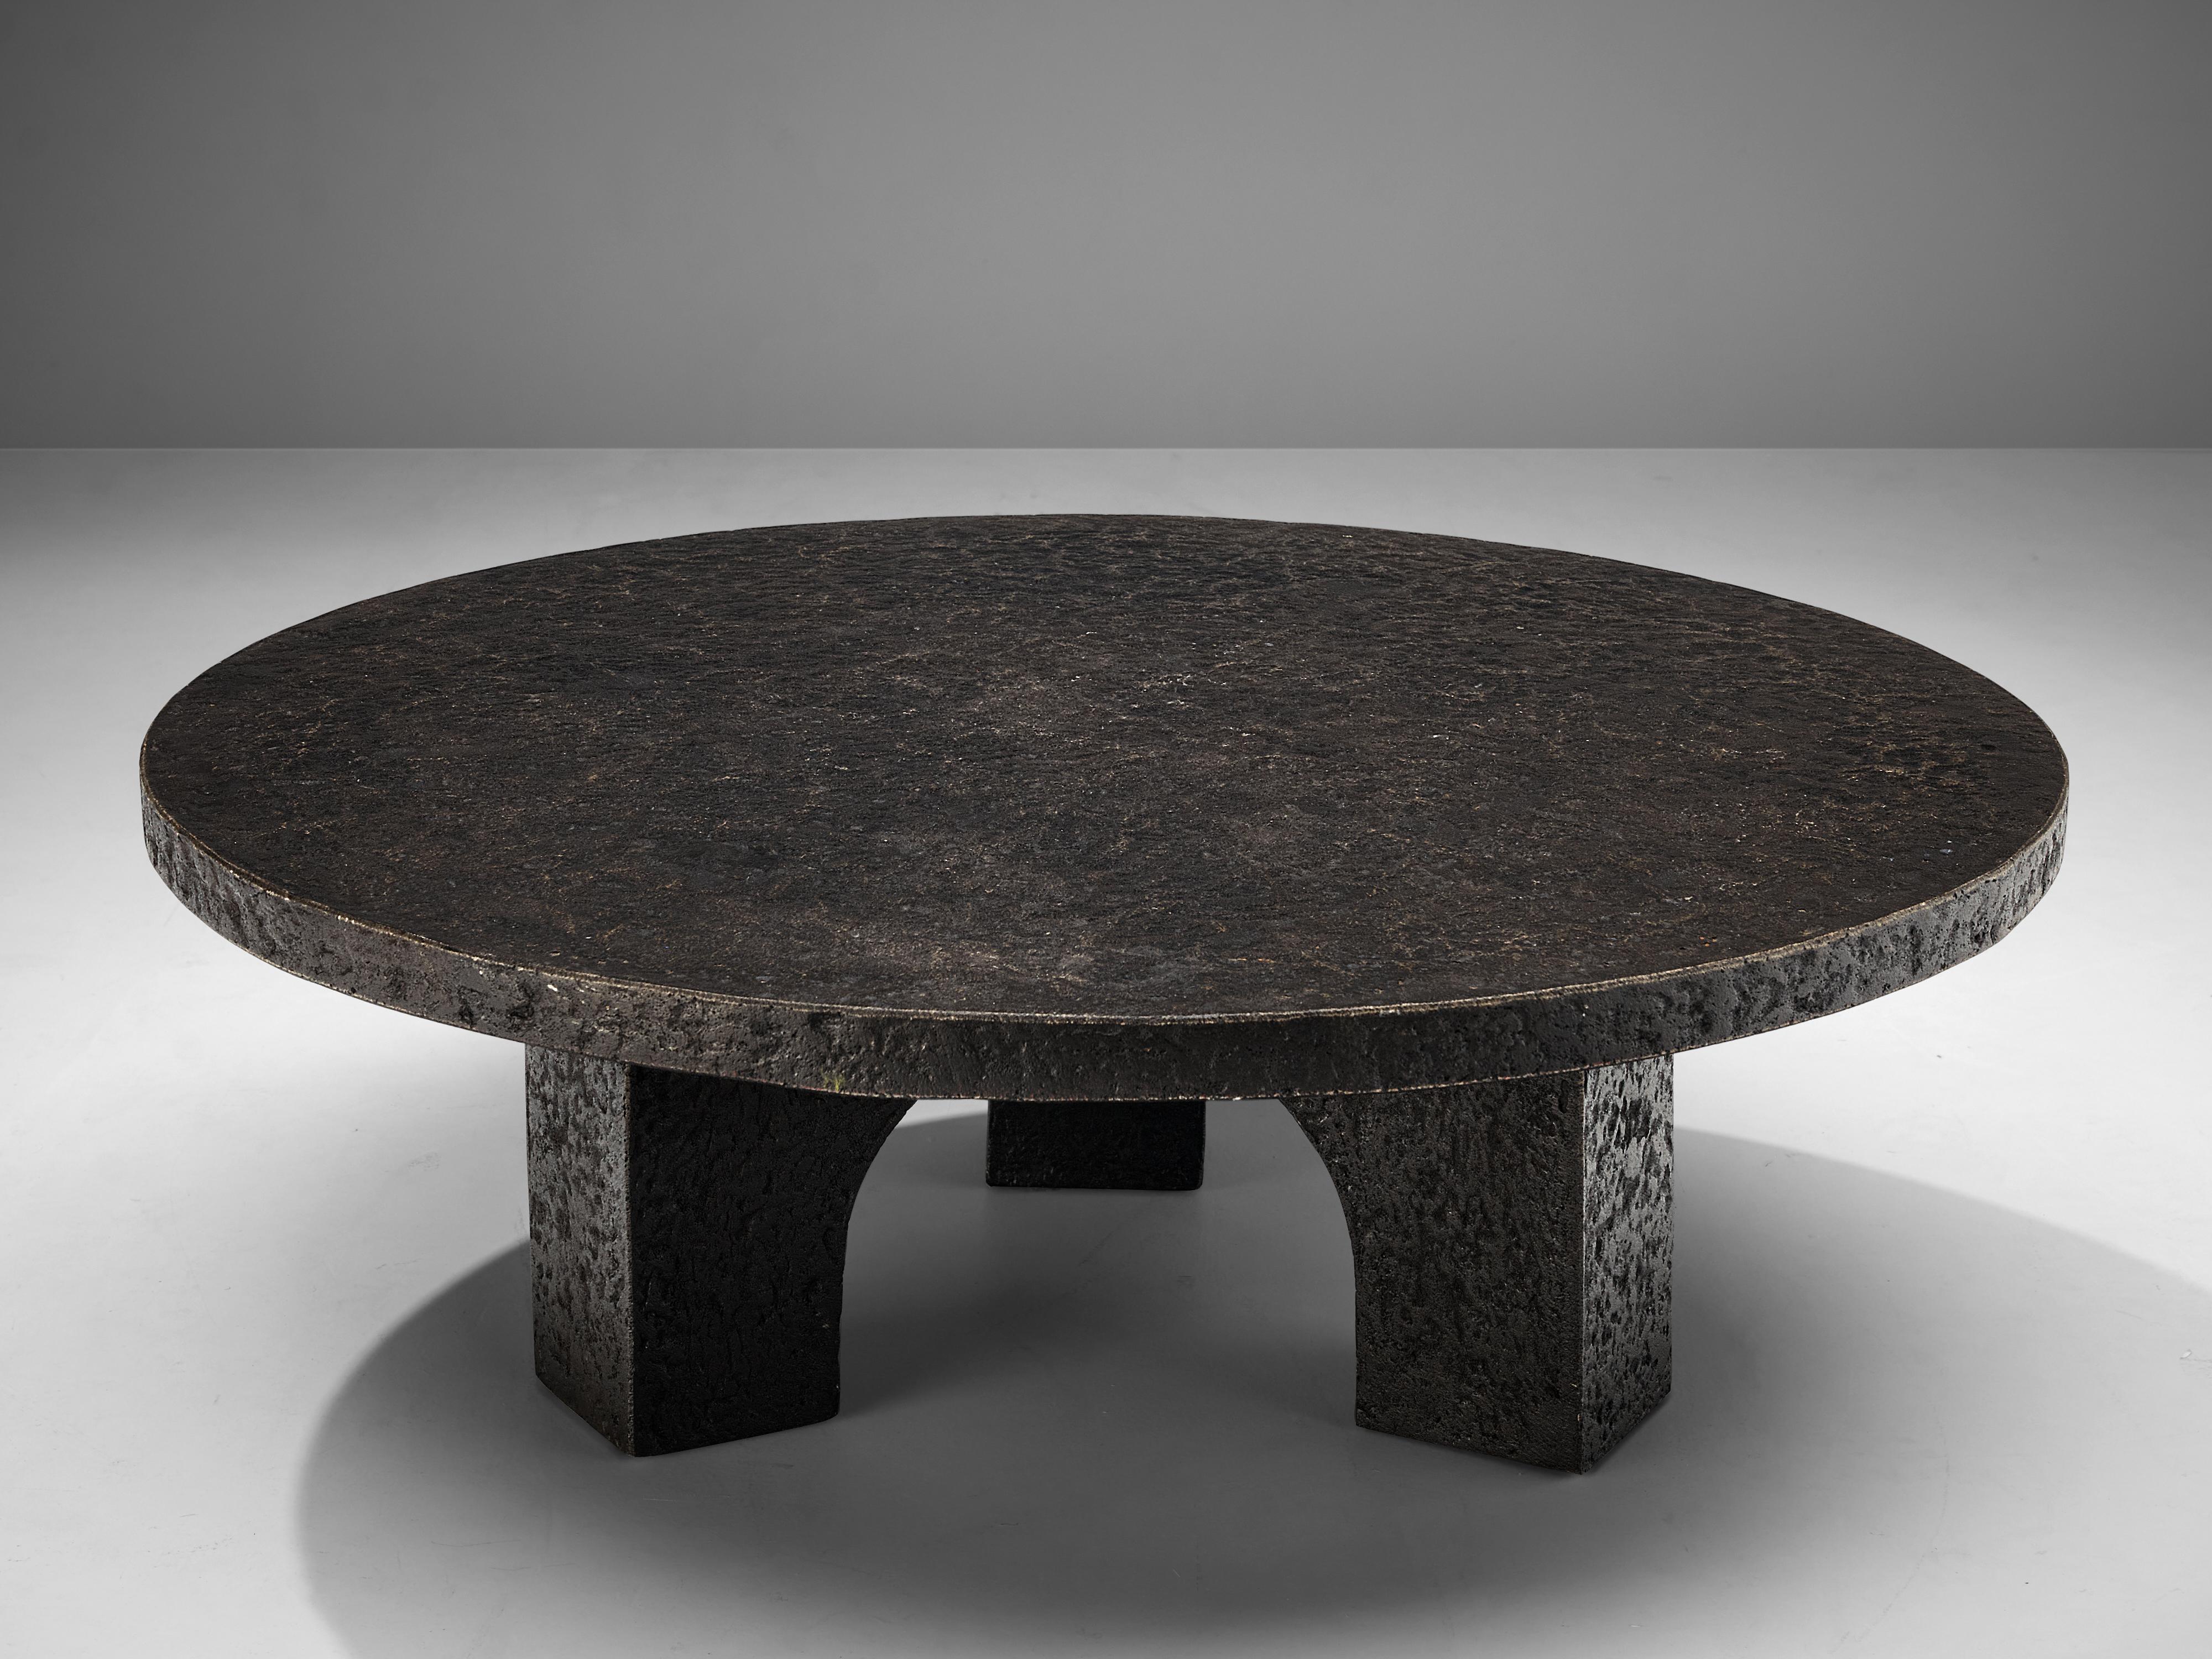 Coffee table, resin, Northern-Europe, 1970s.

This deep black to brown coffee or cocktail table was made in the 1970s. The thick round top is supported by three arched legs that contribute to the sturdy, architectural appearance. This low table is